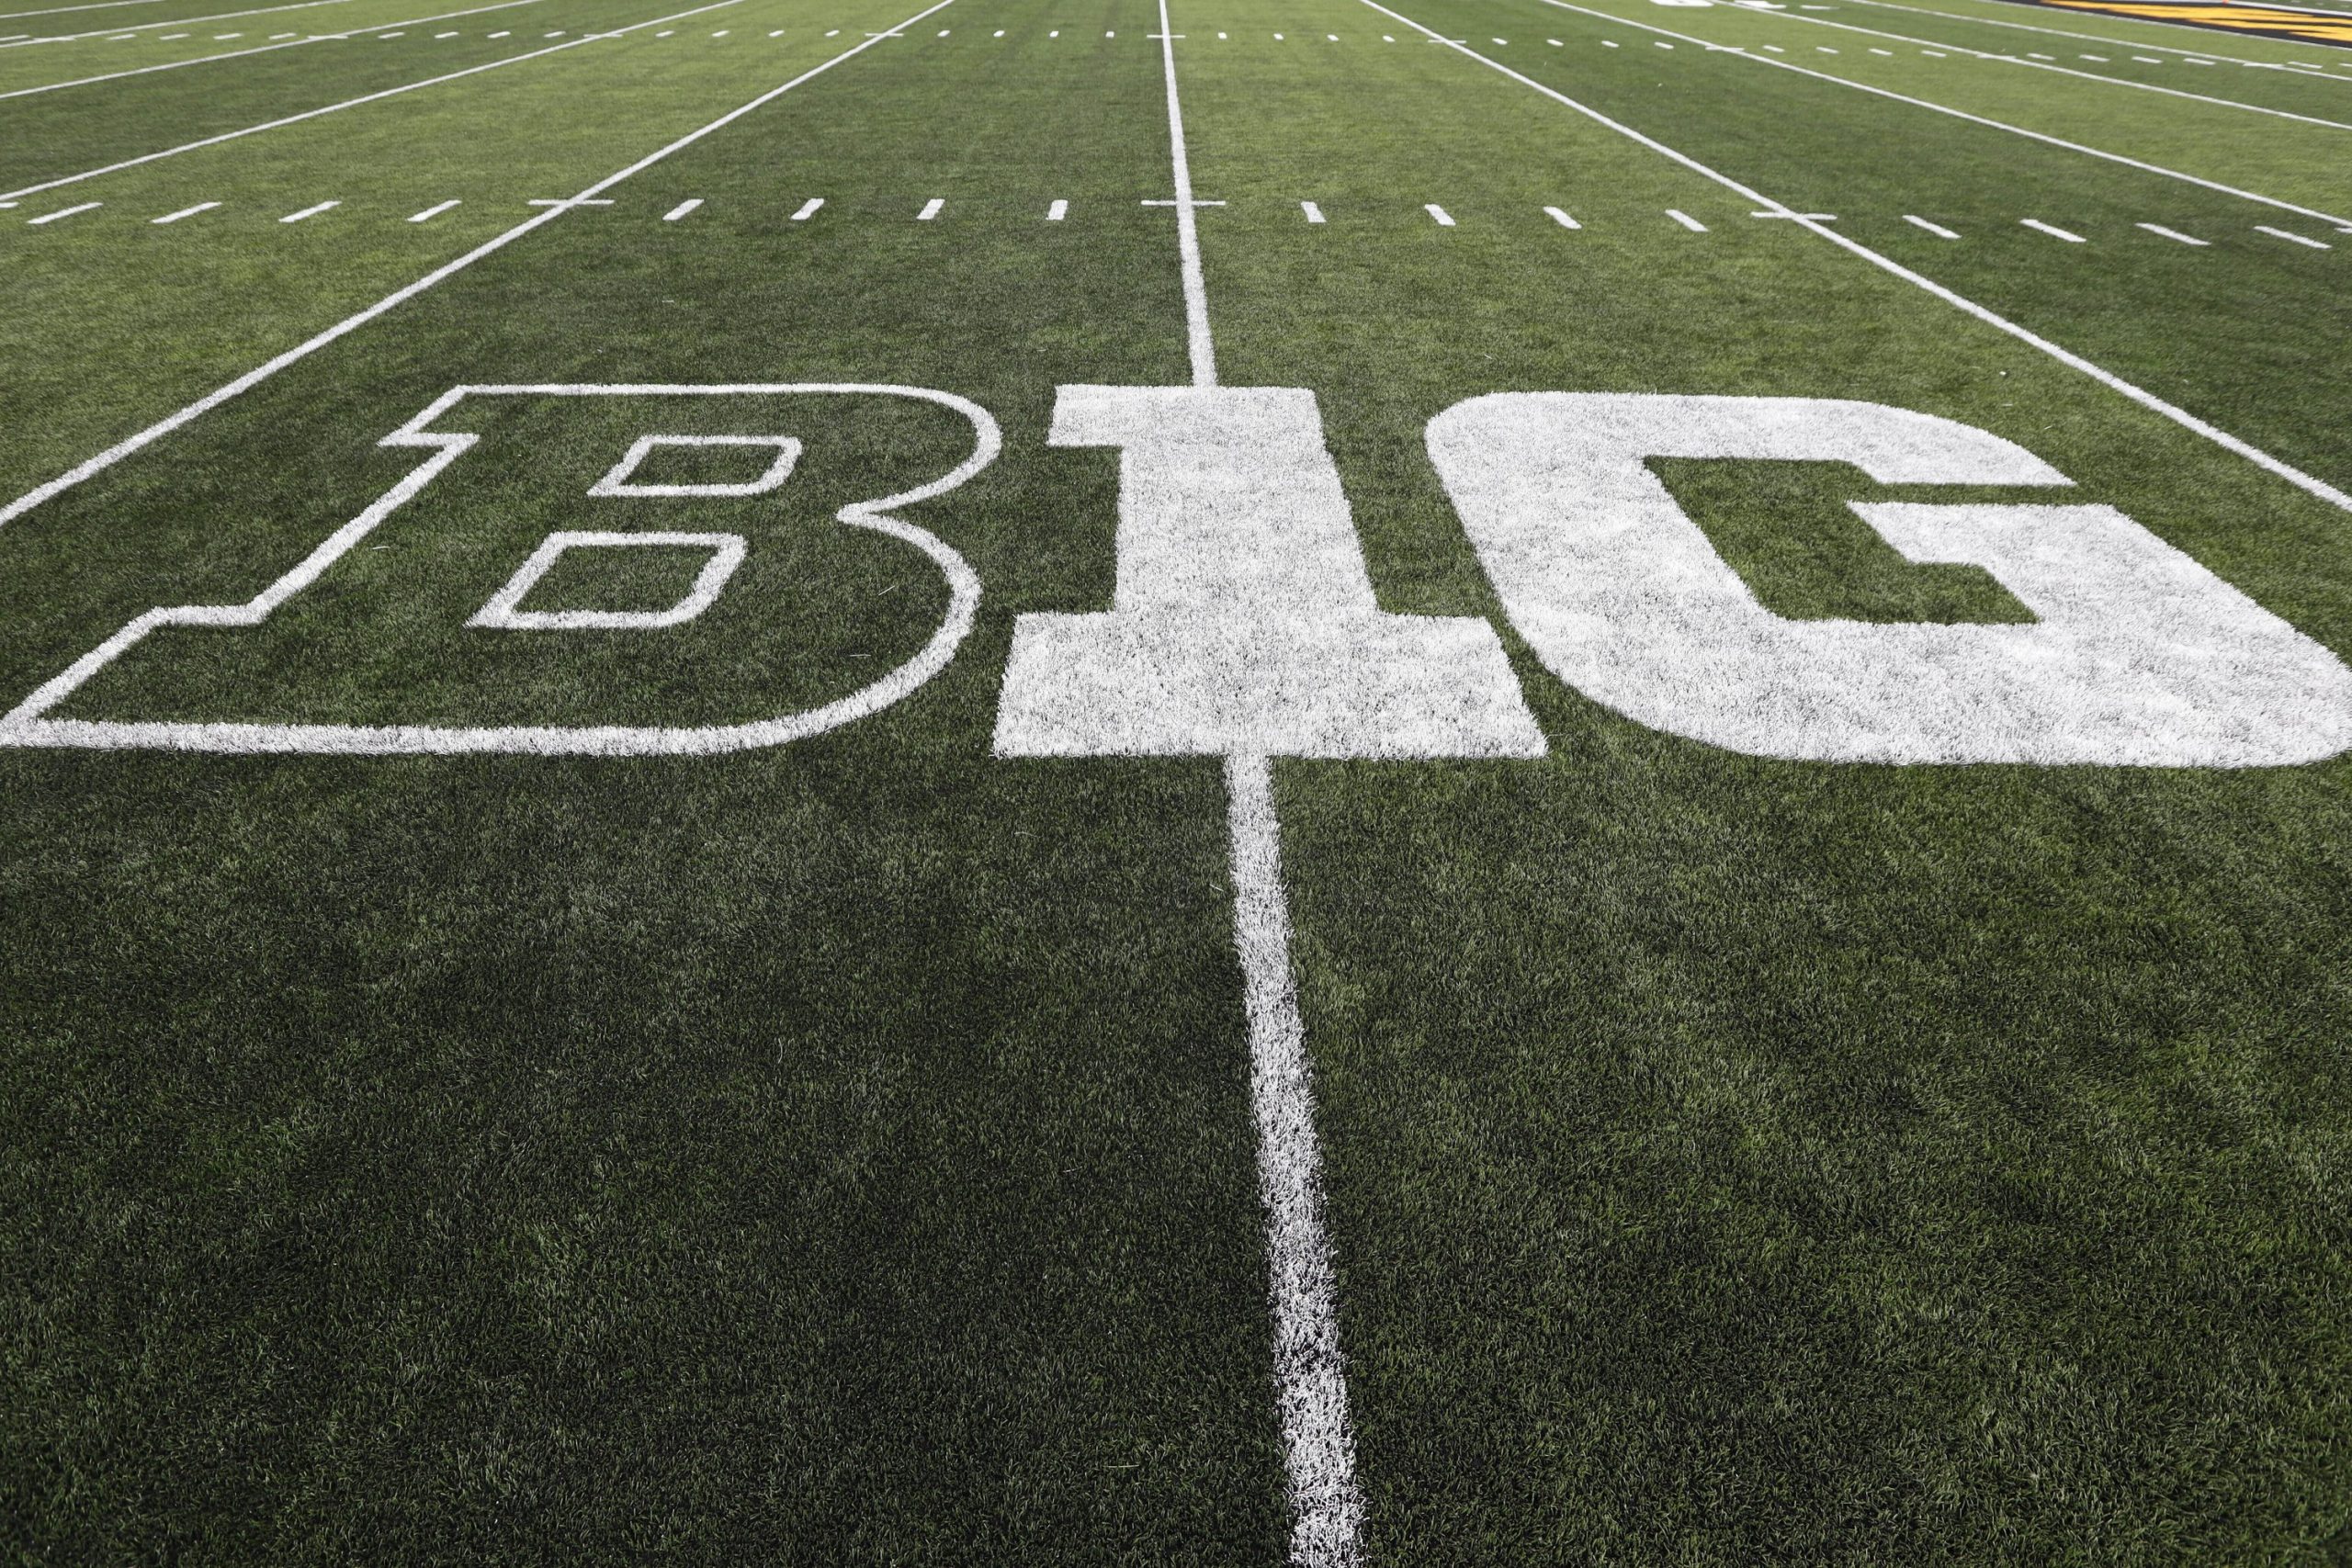 After meeting the presidents, Big Ten football is still active